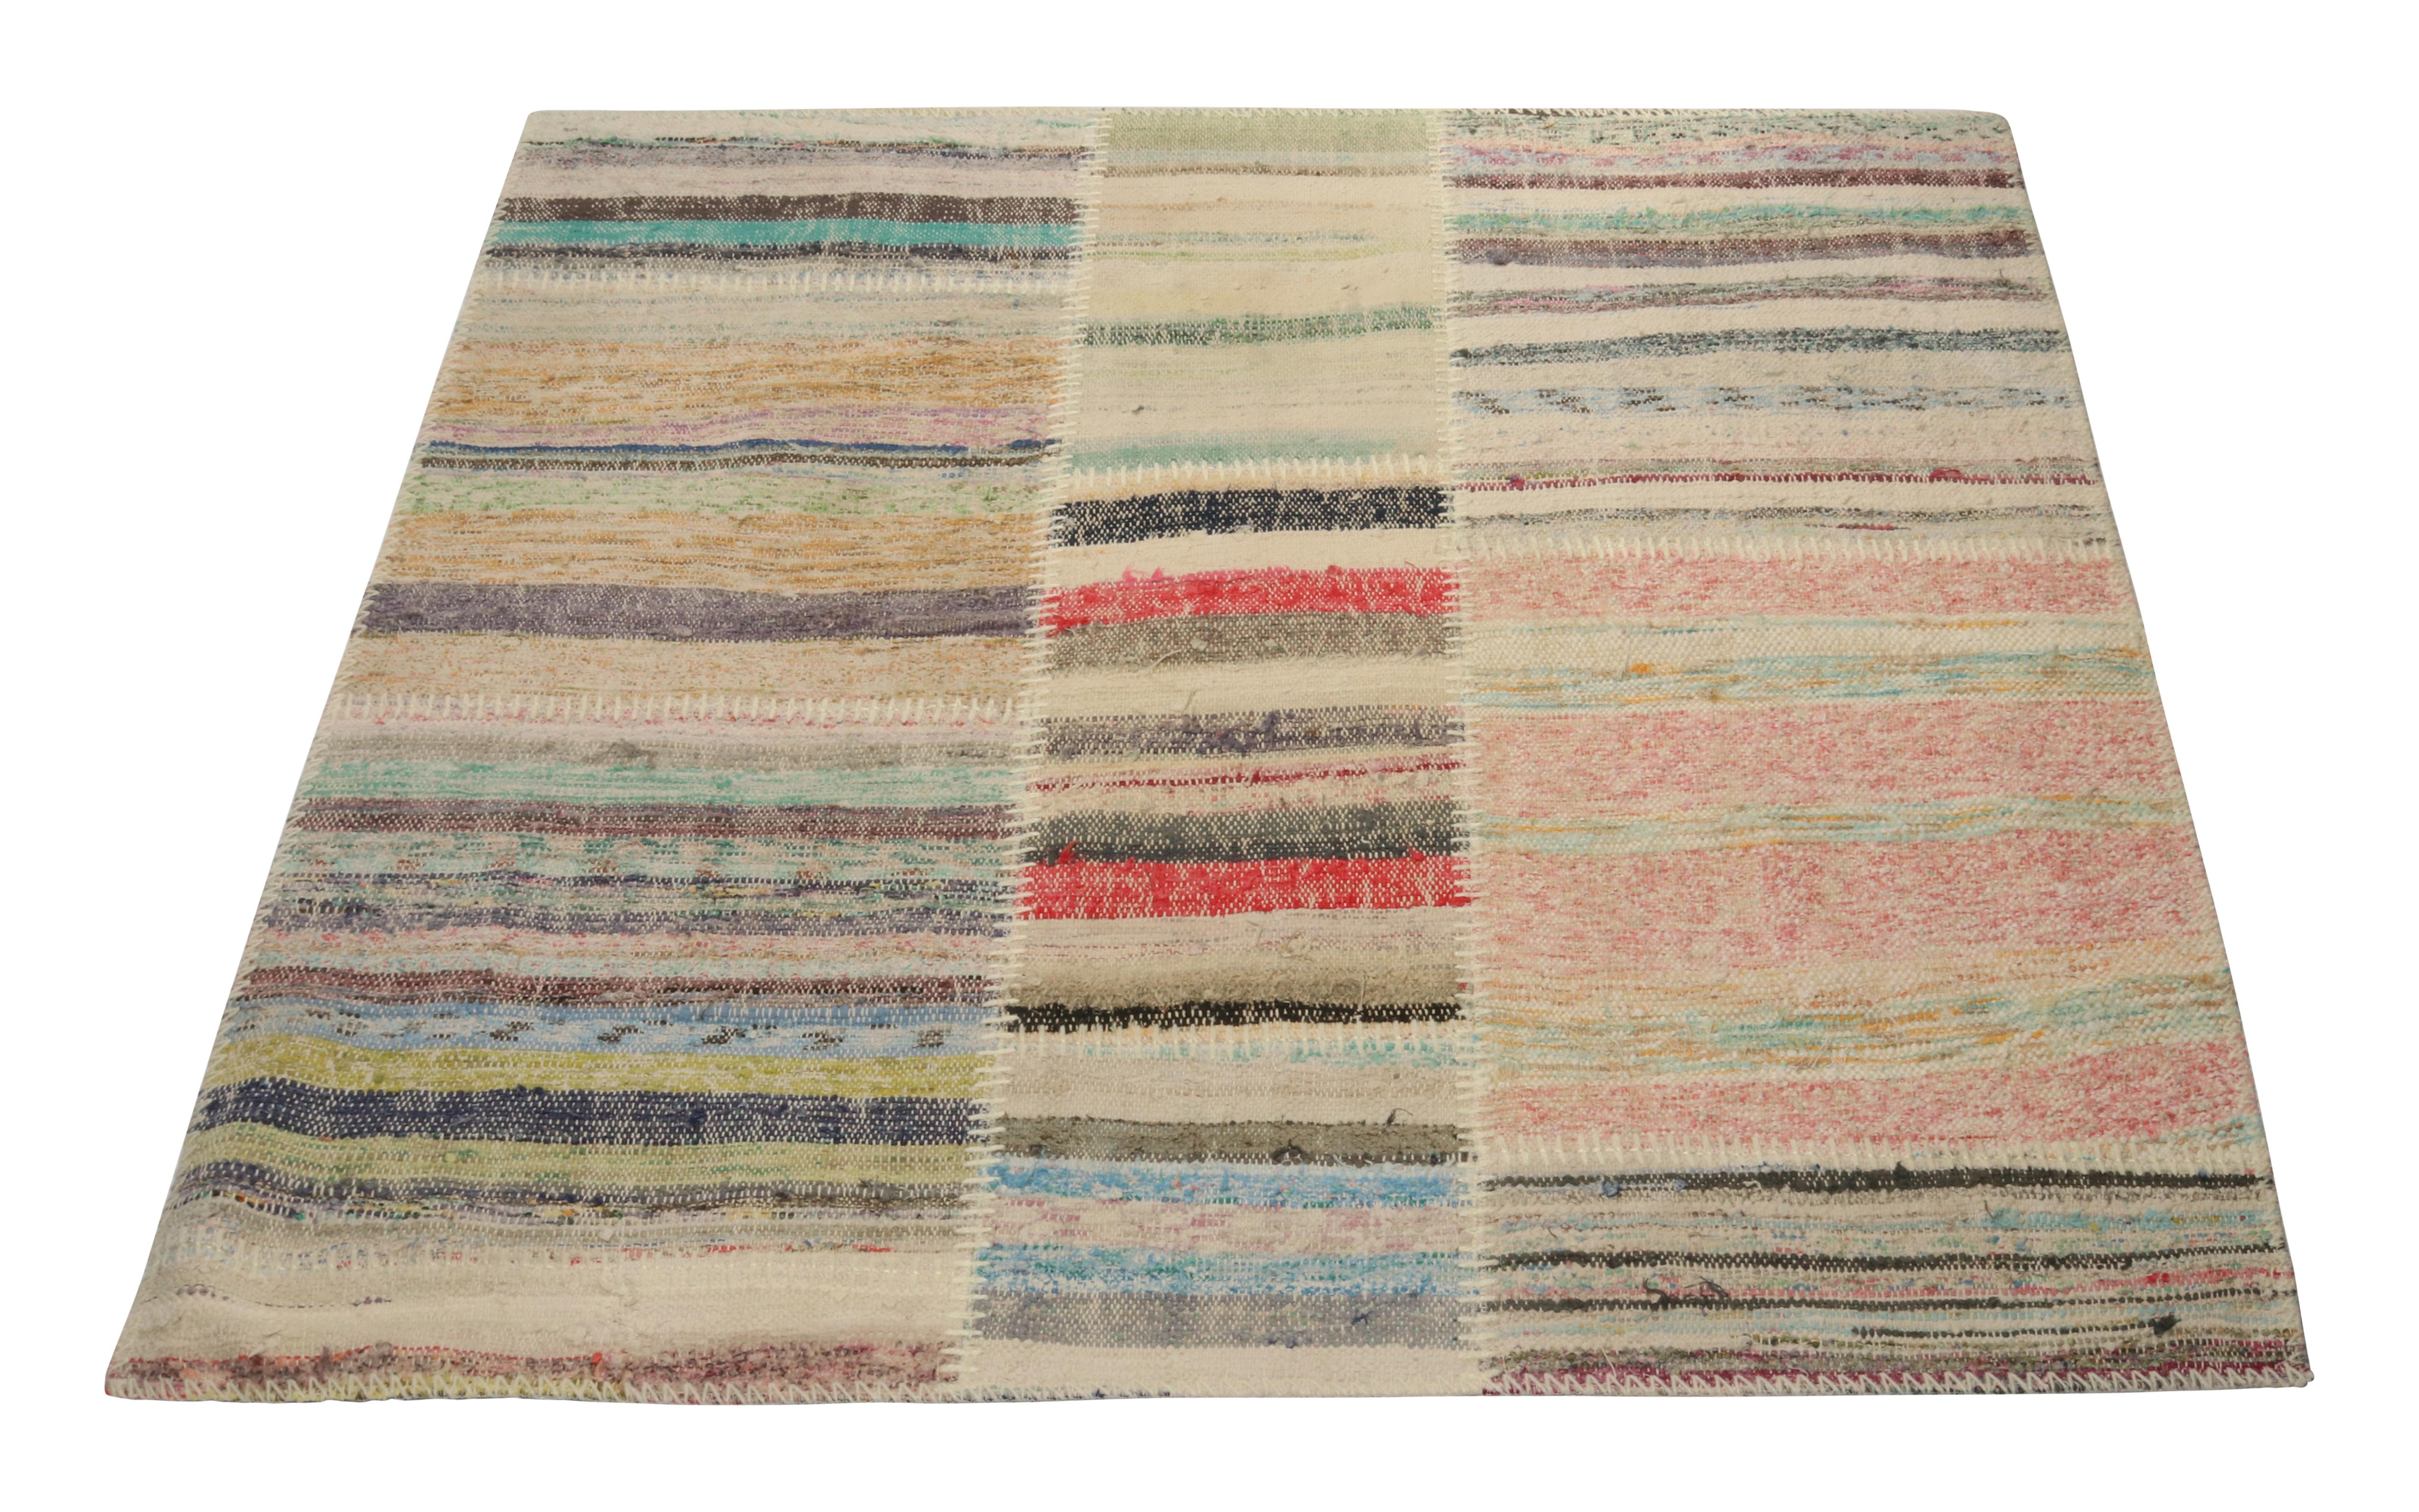 Handwoven in wool, Rug & Kilim presents a 4x4 contemporary square rug from their innovative new patchwork kilim collection. 

On the Design: 

This flat weave technique repurposes vintage yarns in polychromatic stripes and striae, achieving a